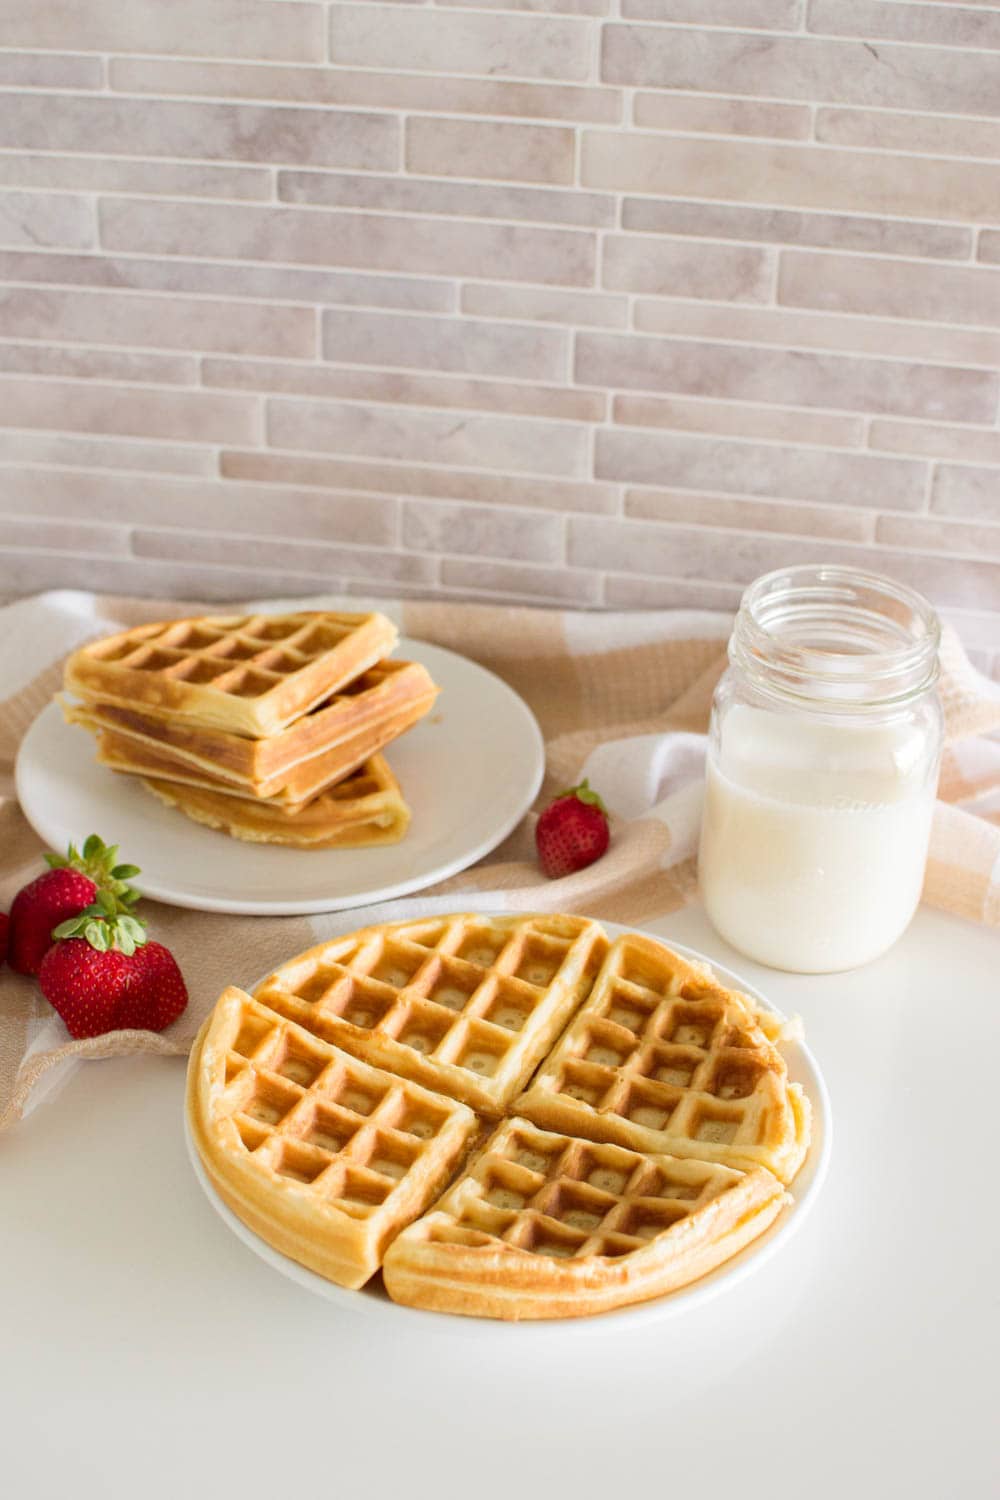 Delicious waffles prepared with our easy waffle recipe, served with milk and additional fruit